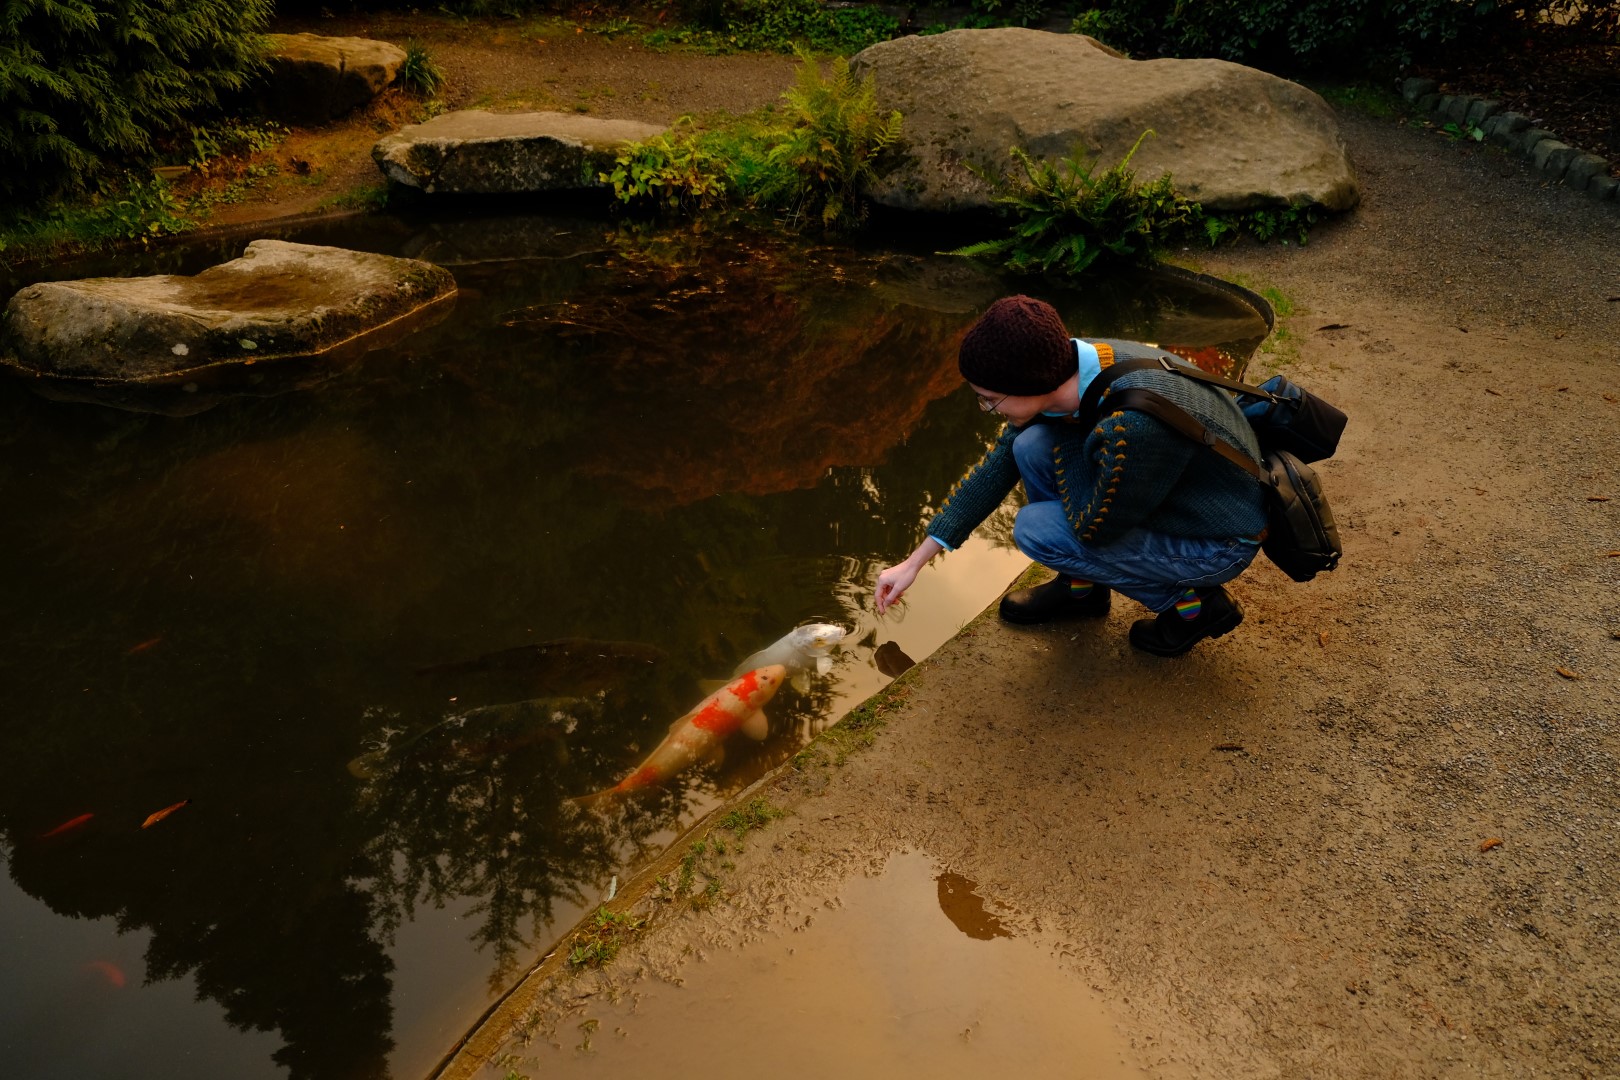 A koi pond in fall afternoon light. A person in a knitted dark teal sweater crouches in front of the pond and extends hir hand towards the surface of the water. Several curious koi are arriving to see what the matter is, and one white koi has stuck its face a bit out of the water to reach toward hir hand.